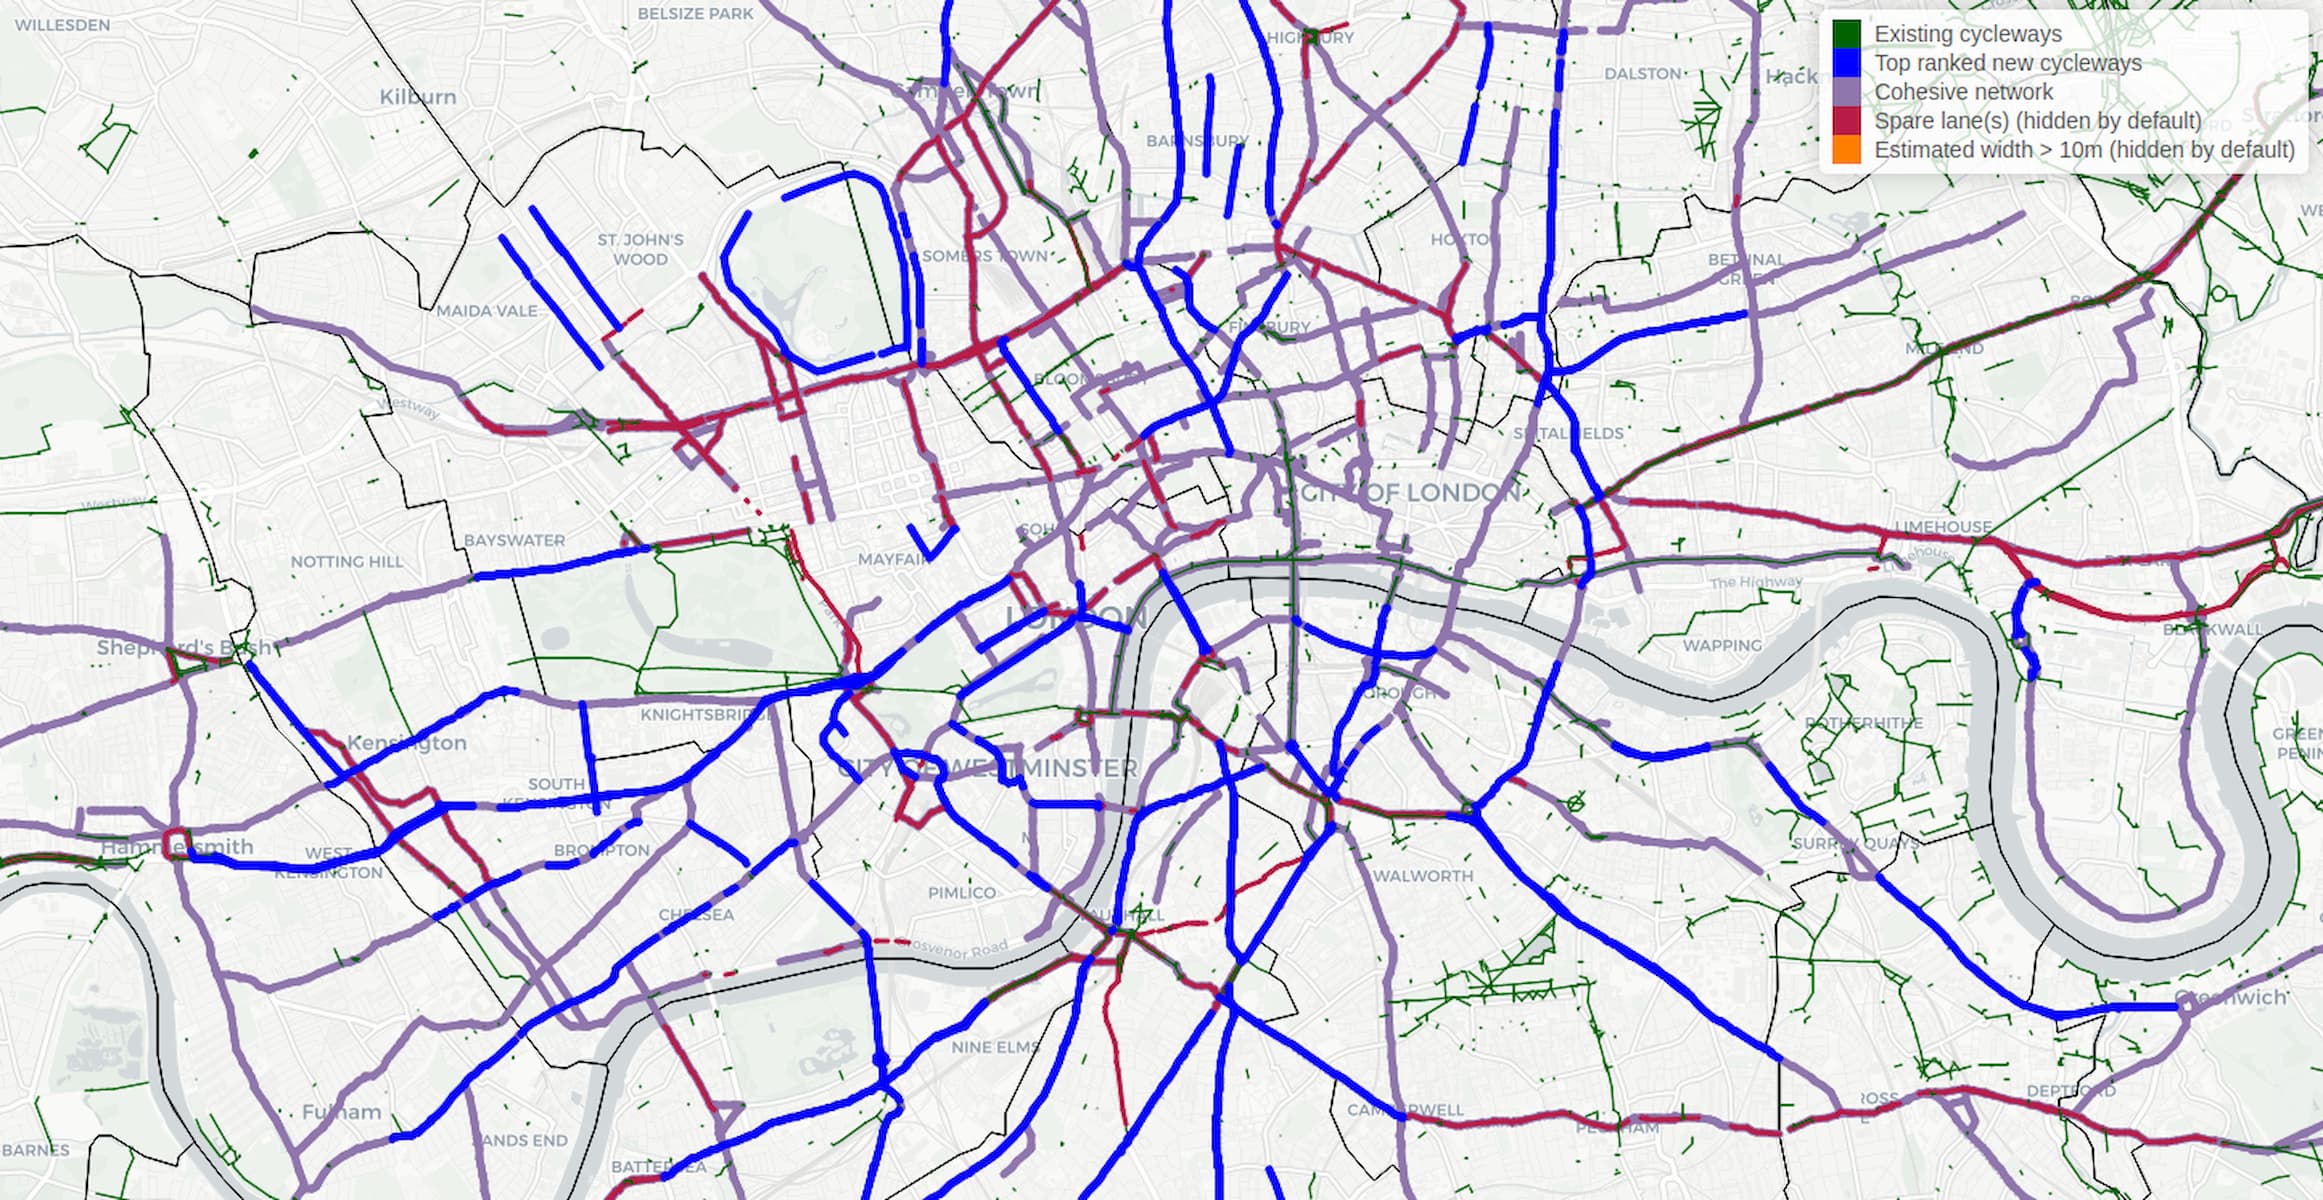 The map output of the Rapid Cycleway Prioritisation Tool for London